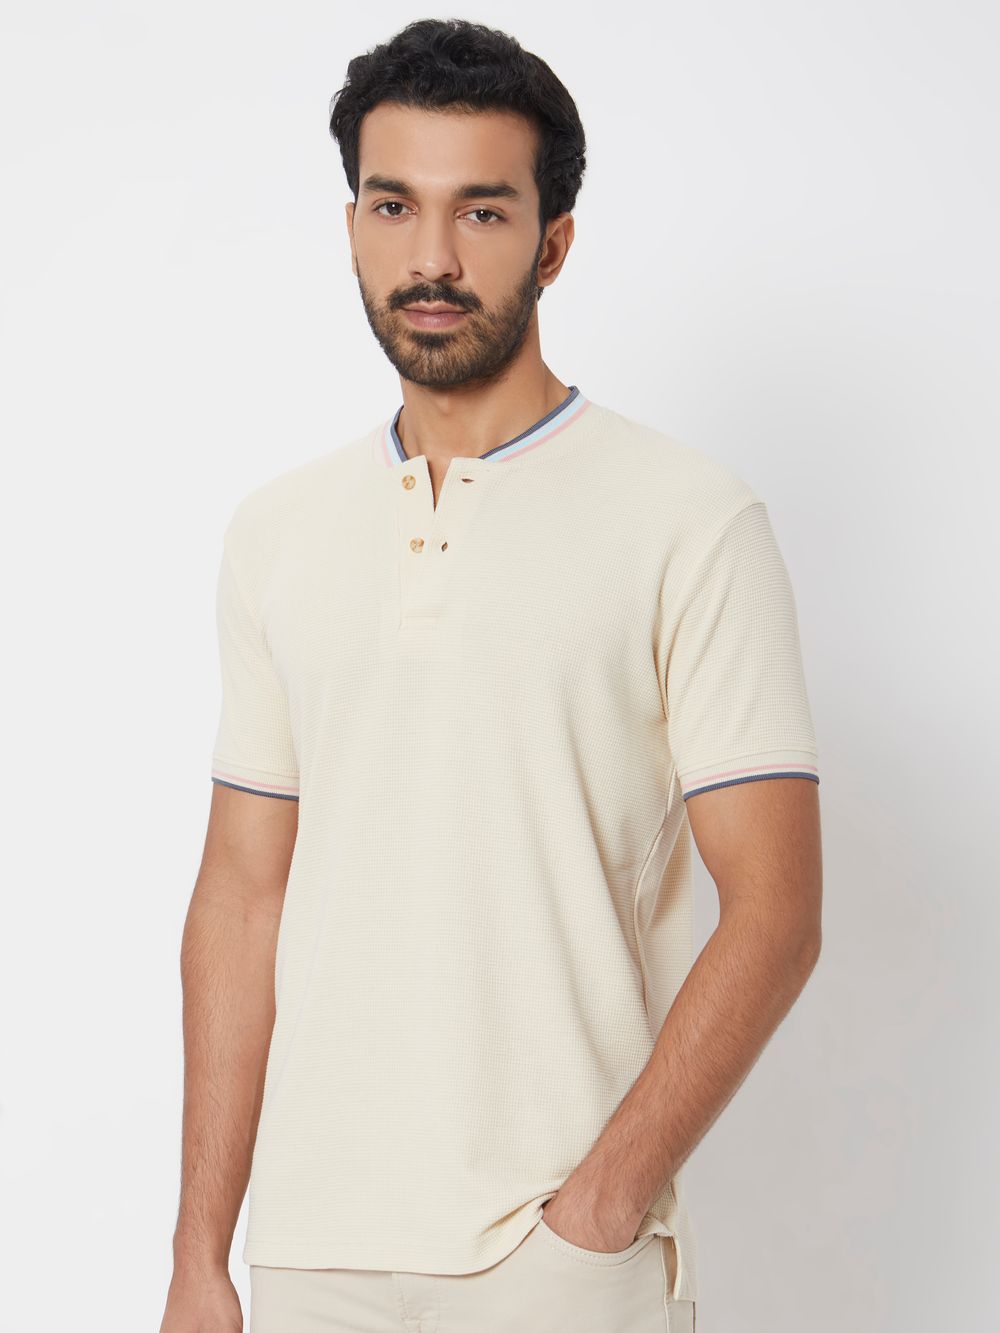 Off White Textured Tipped Collar Slim Fit Henley T-Shirt